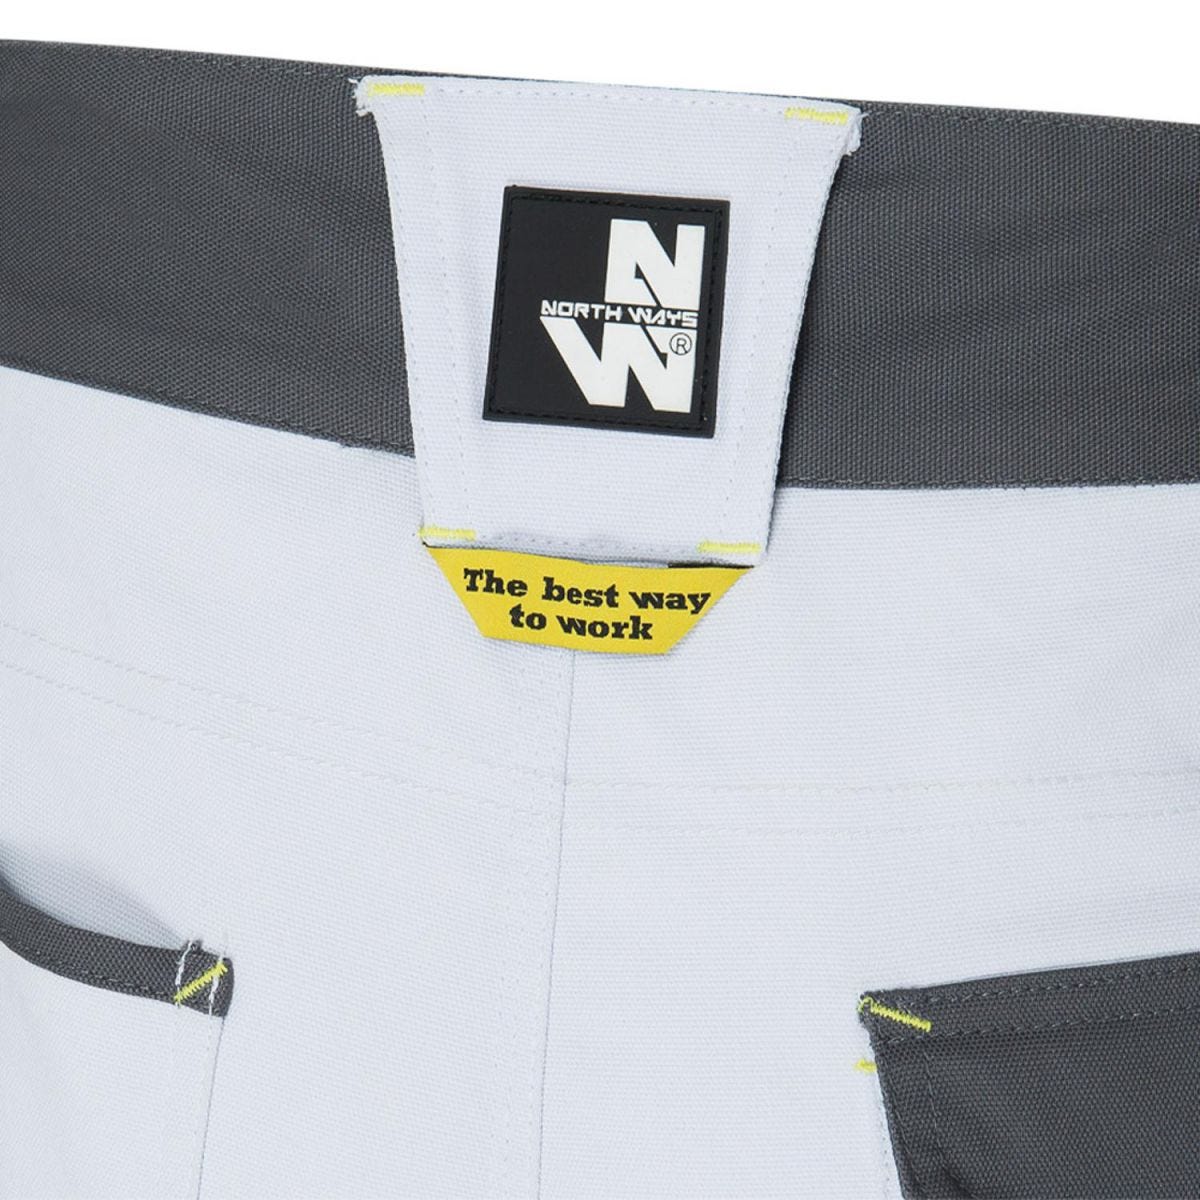 Pantalon de travail multipoches Cary blanc - North Ways - Taille 52 3